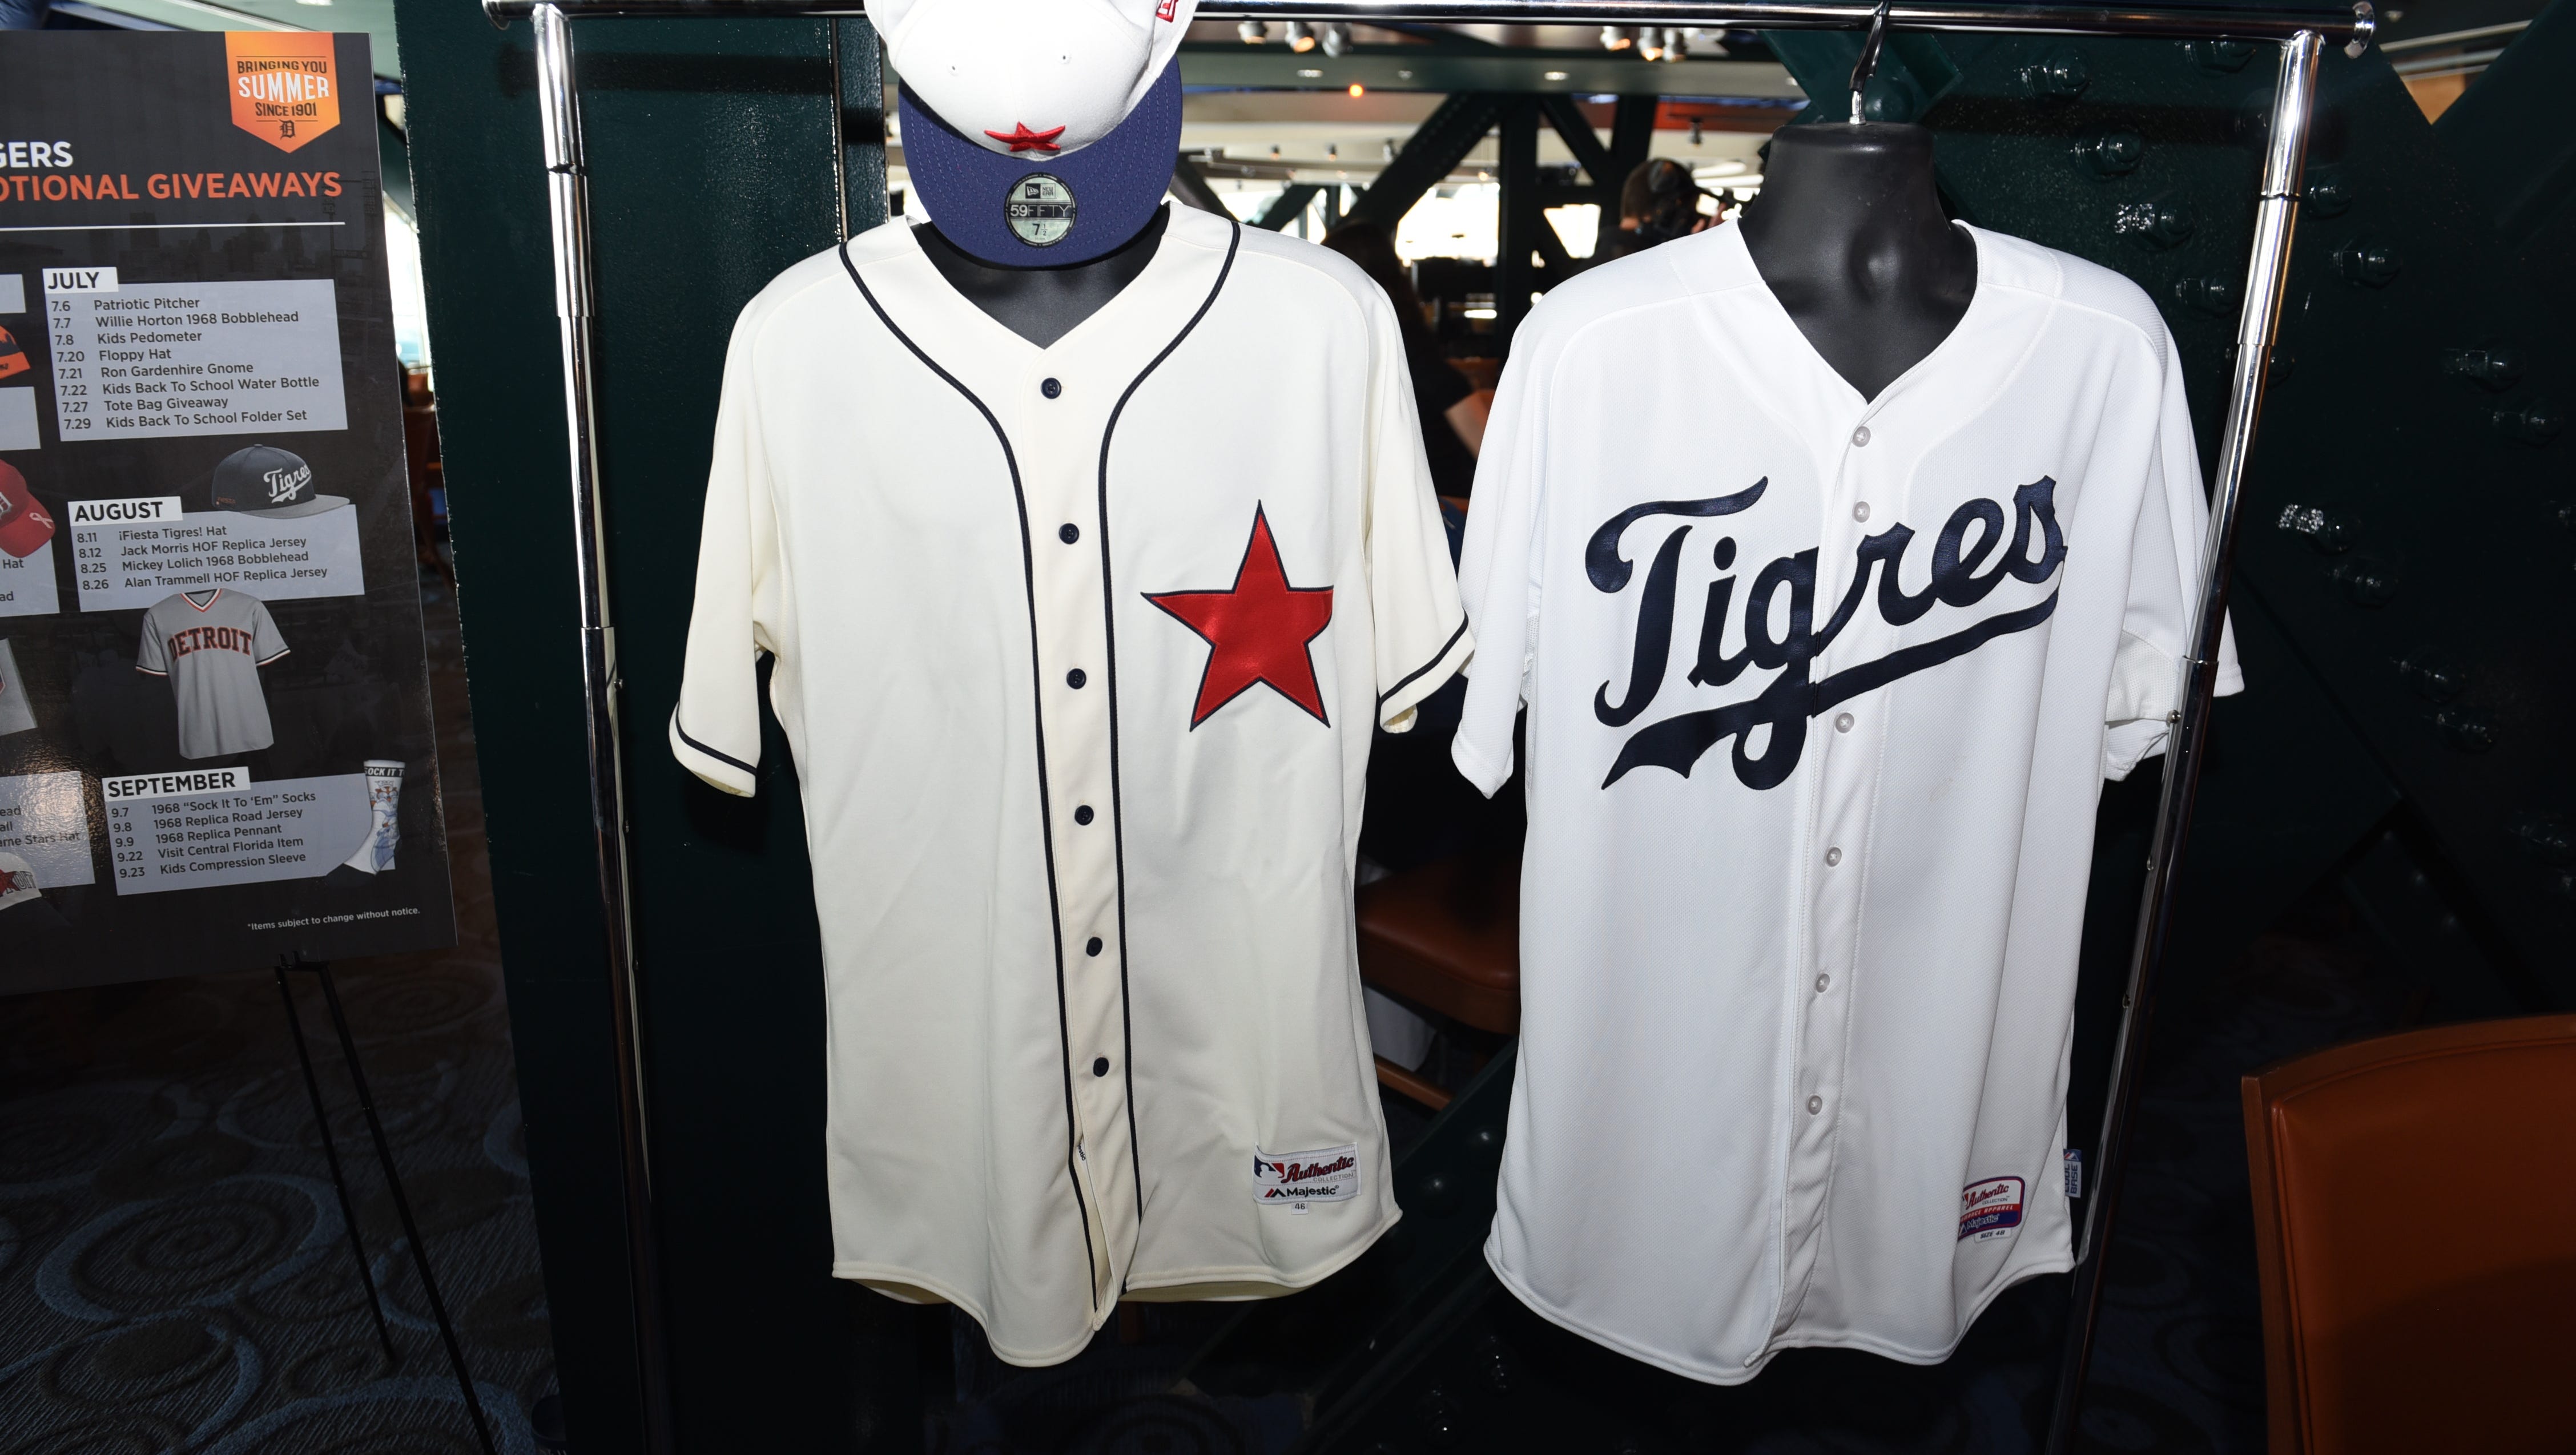 New merchandise  was presented during a media event unveiling concessions at Comerica Park.